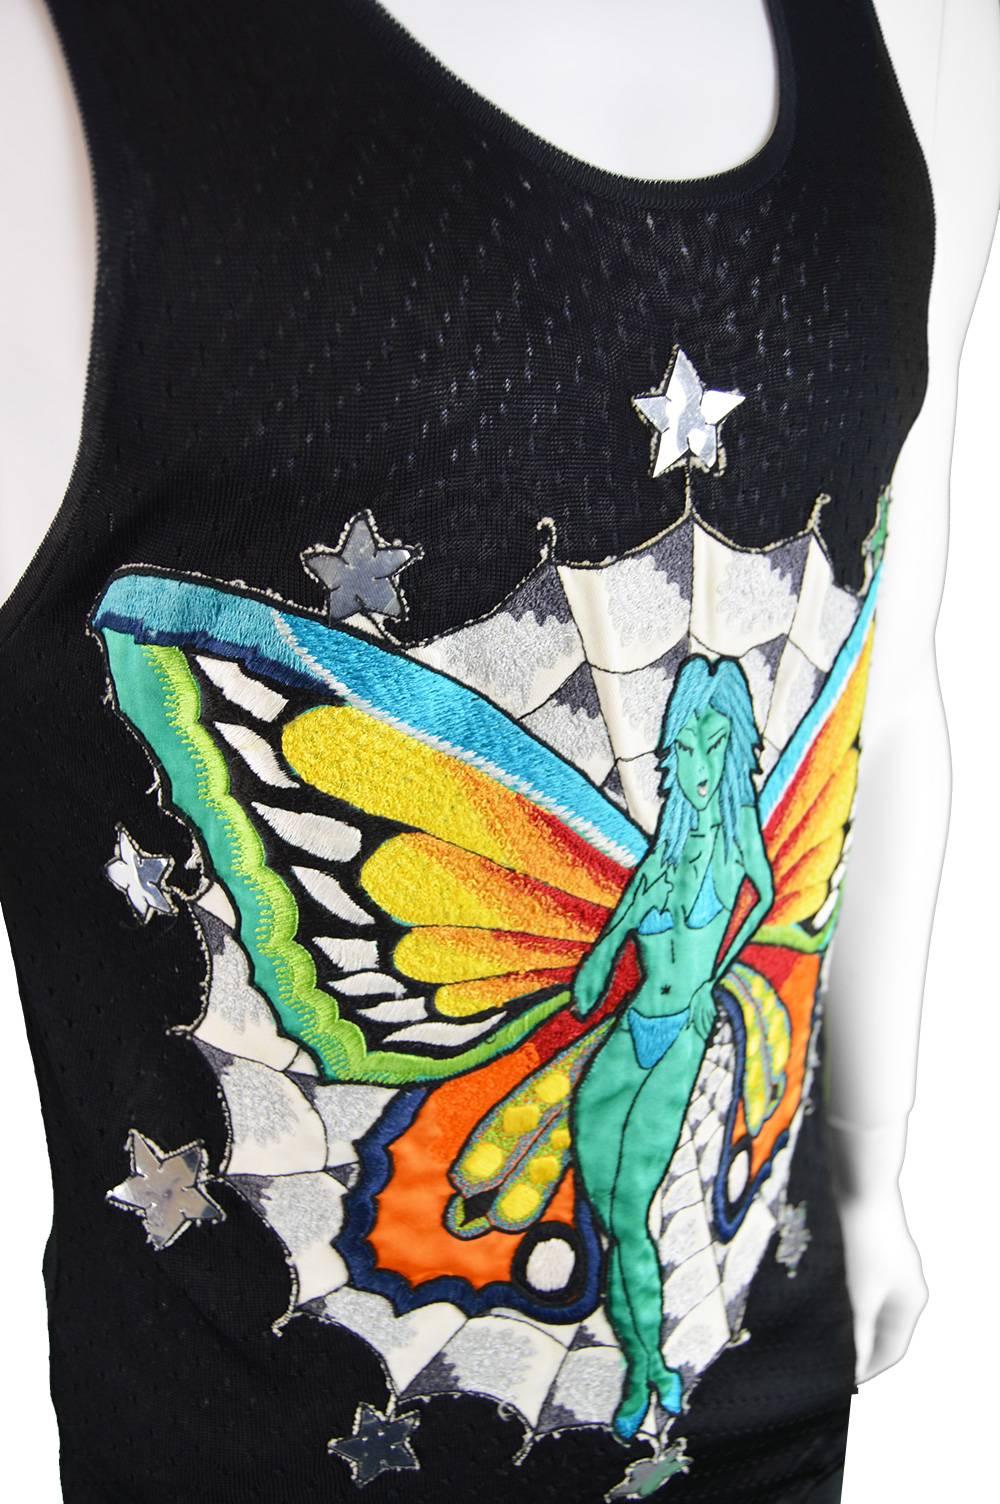 Tom Ford for Gucci Mens Rayon Knit Tank Top with Embroidered Fairy, S/S 2002  1